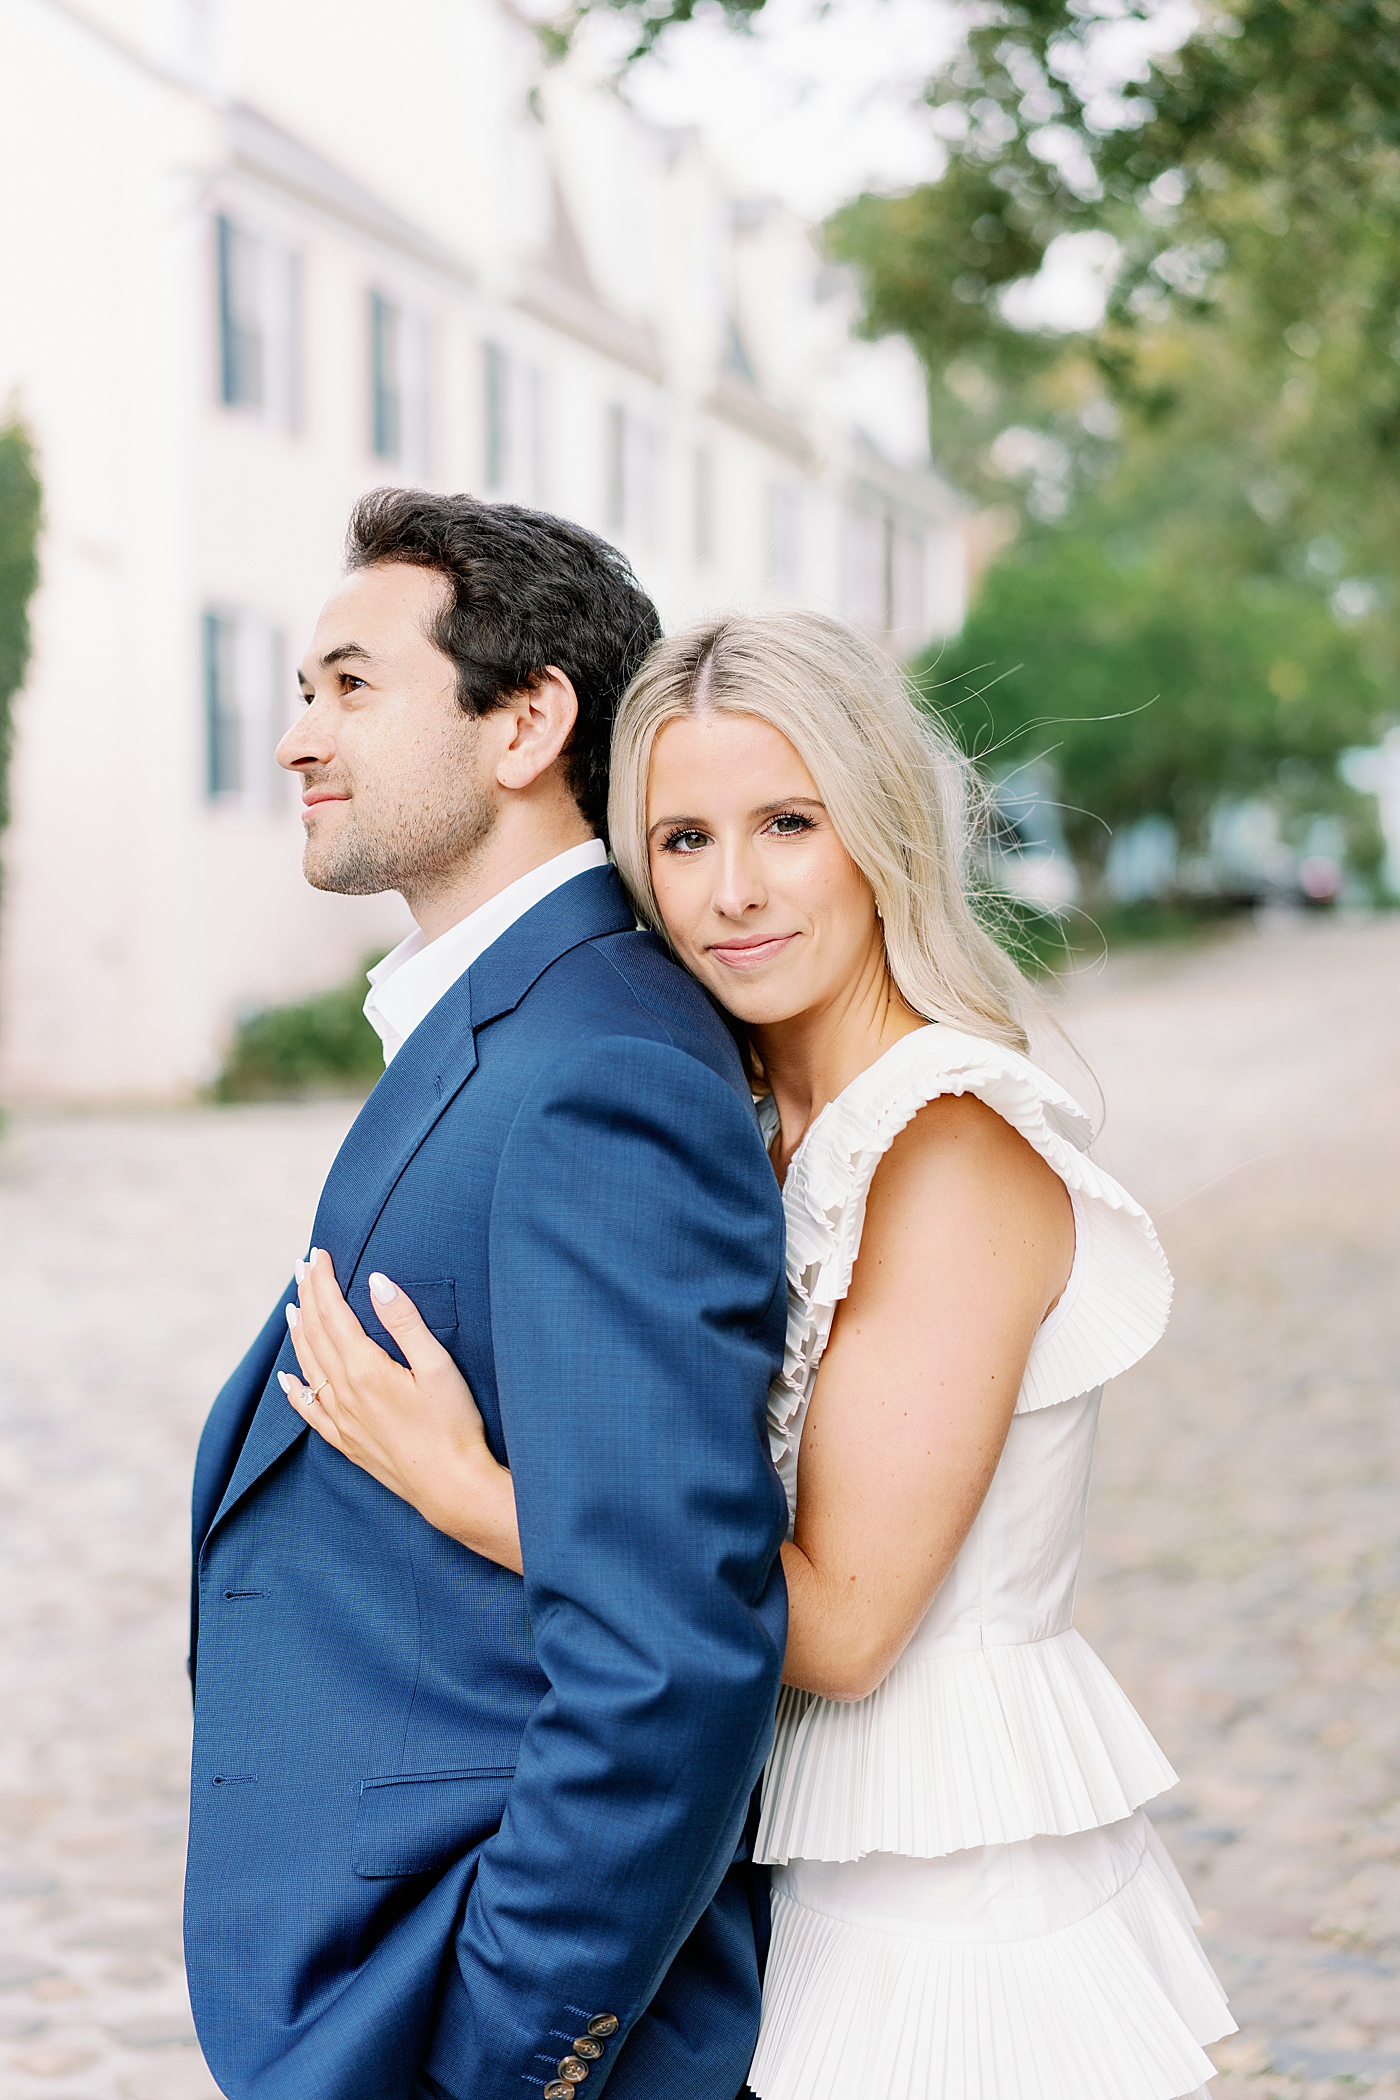 Couple embracing on cobblestone street | Image by Annie Laura Photo